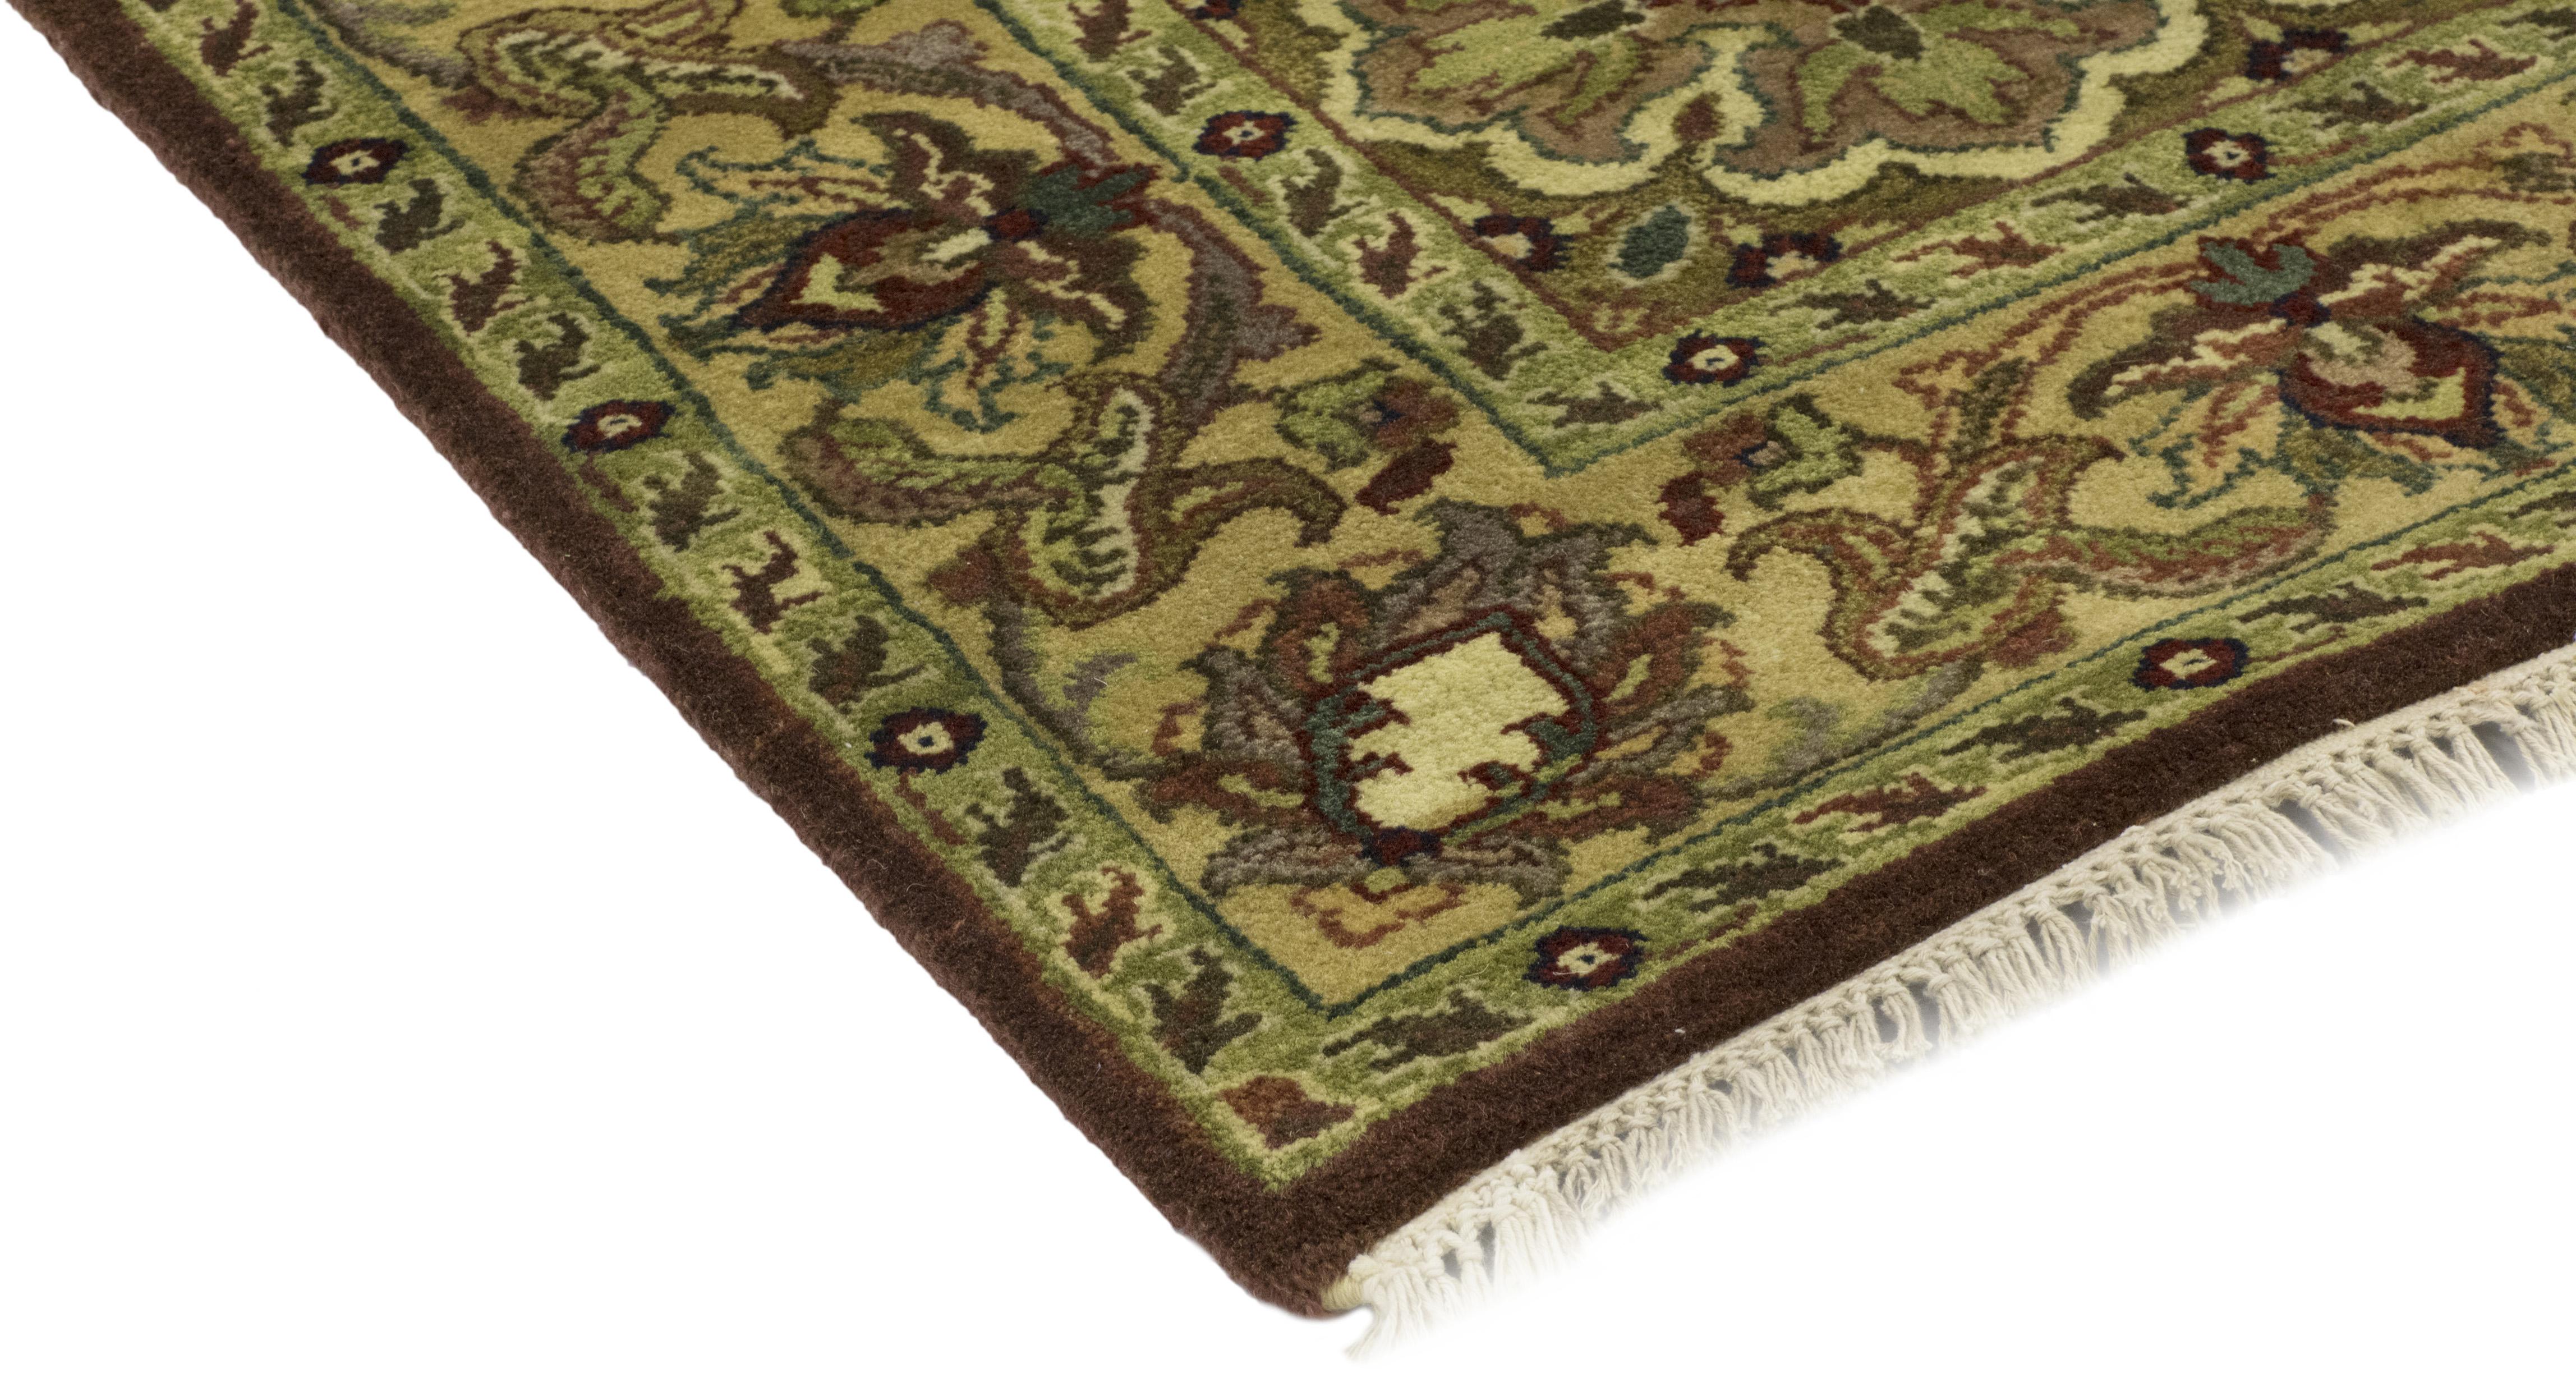 Color: Brown - Made in: India. 100% wool. Originating centuries ago in what is now Turkey, Oushak rugs have long been sought after for their intricate patterns, lush yet subtle colors, and soft luster. These rugs continue that tradition. Hand